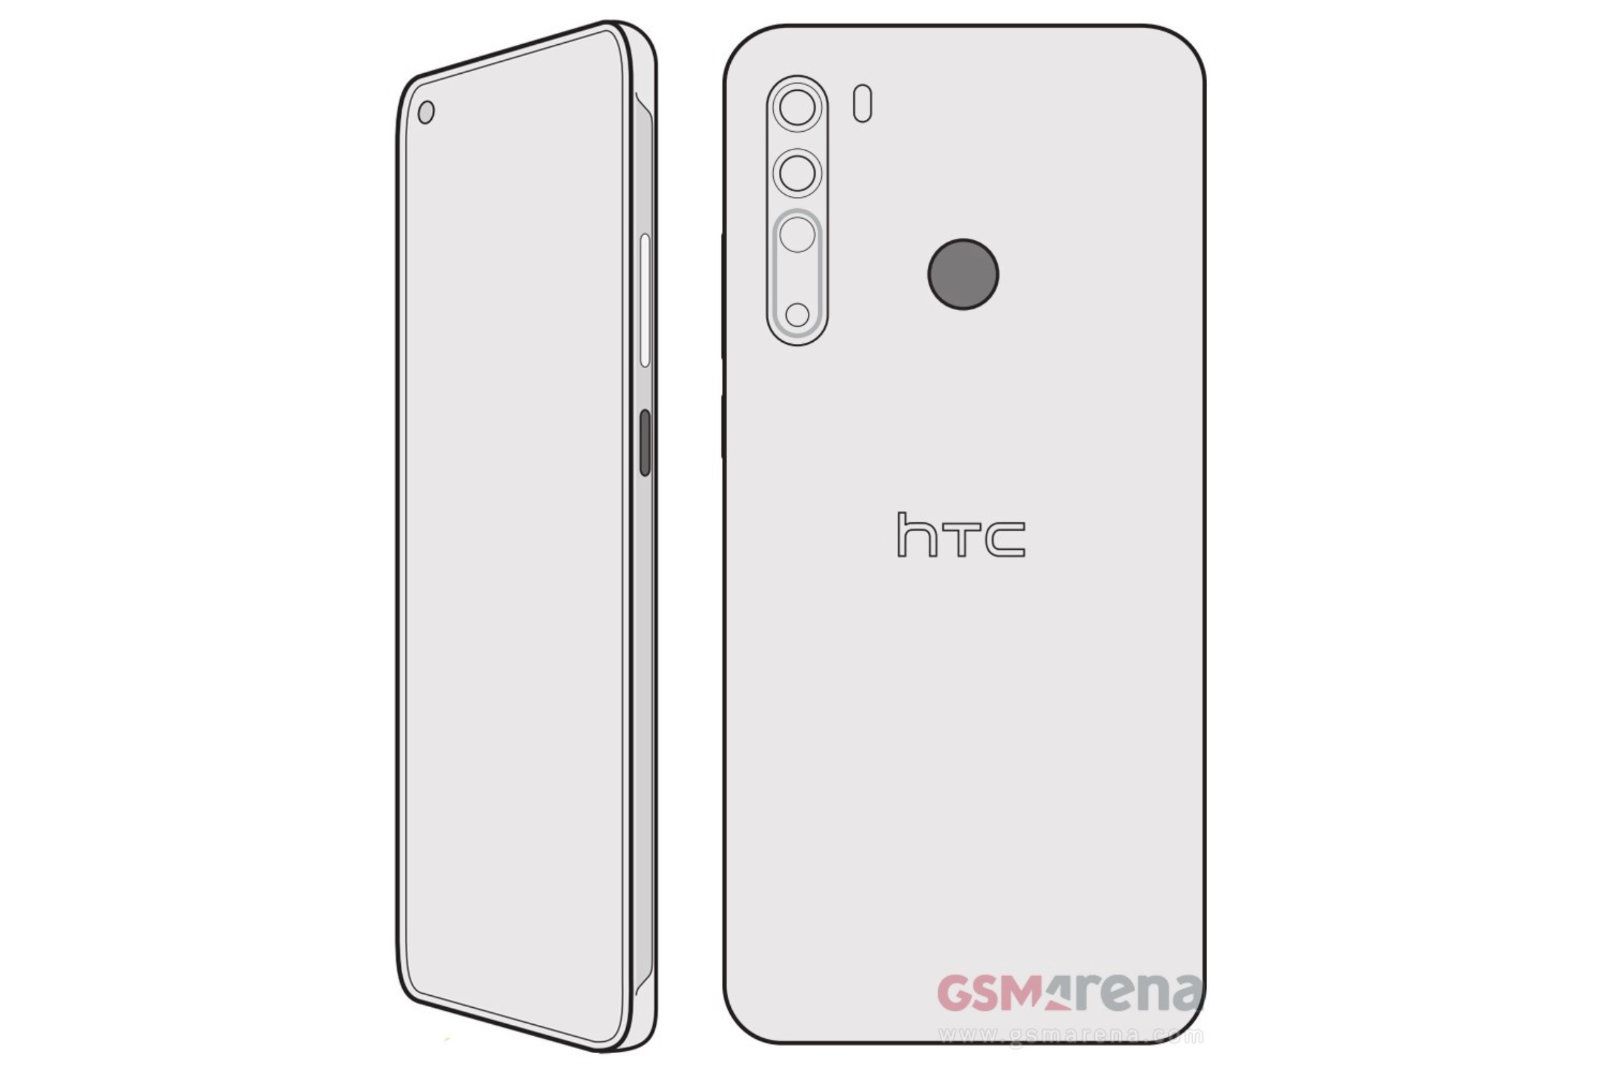 HTC Desire 20 Pro schematic leak reveals hole-punch display and quad camera image 1